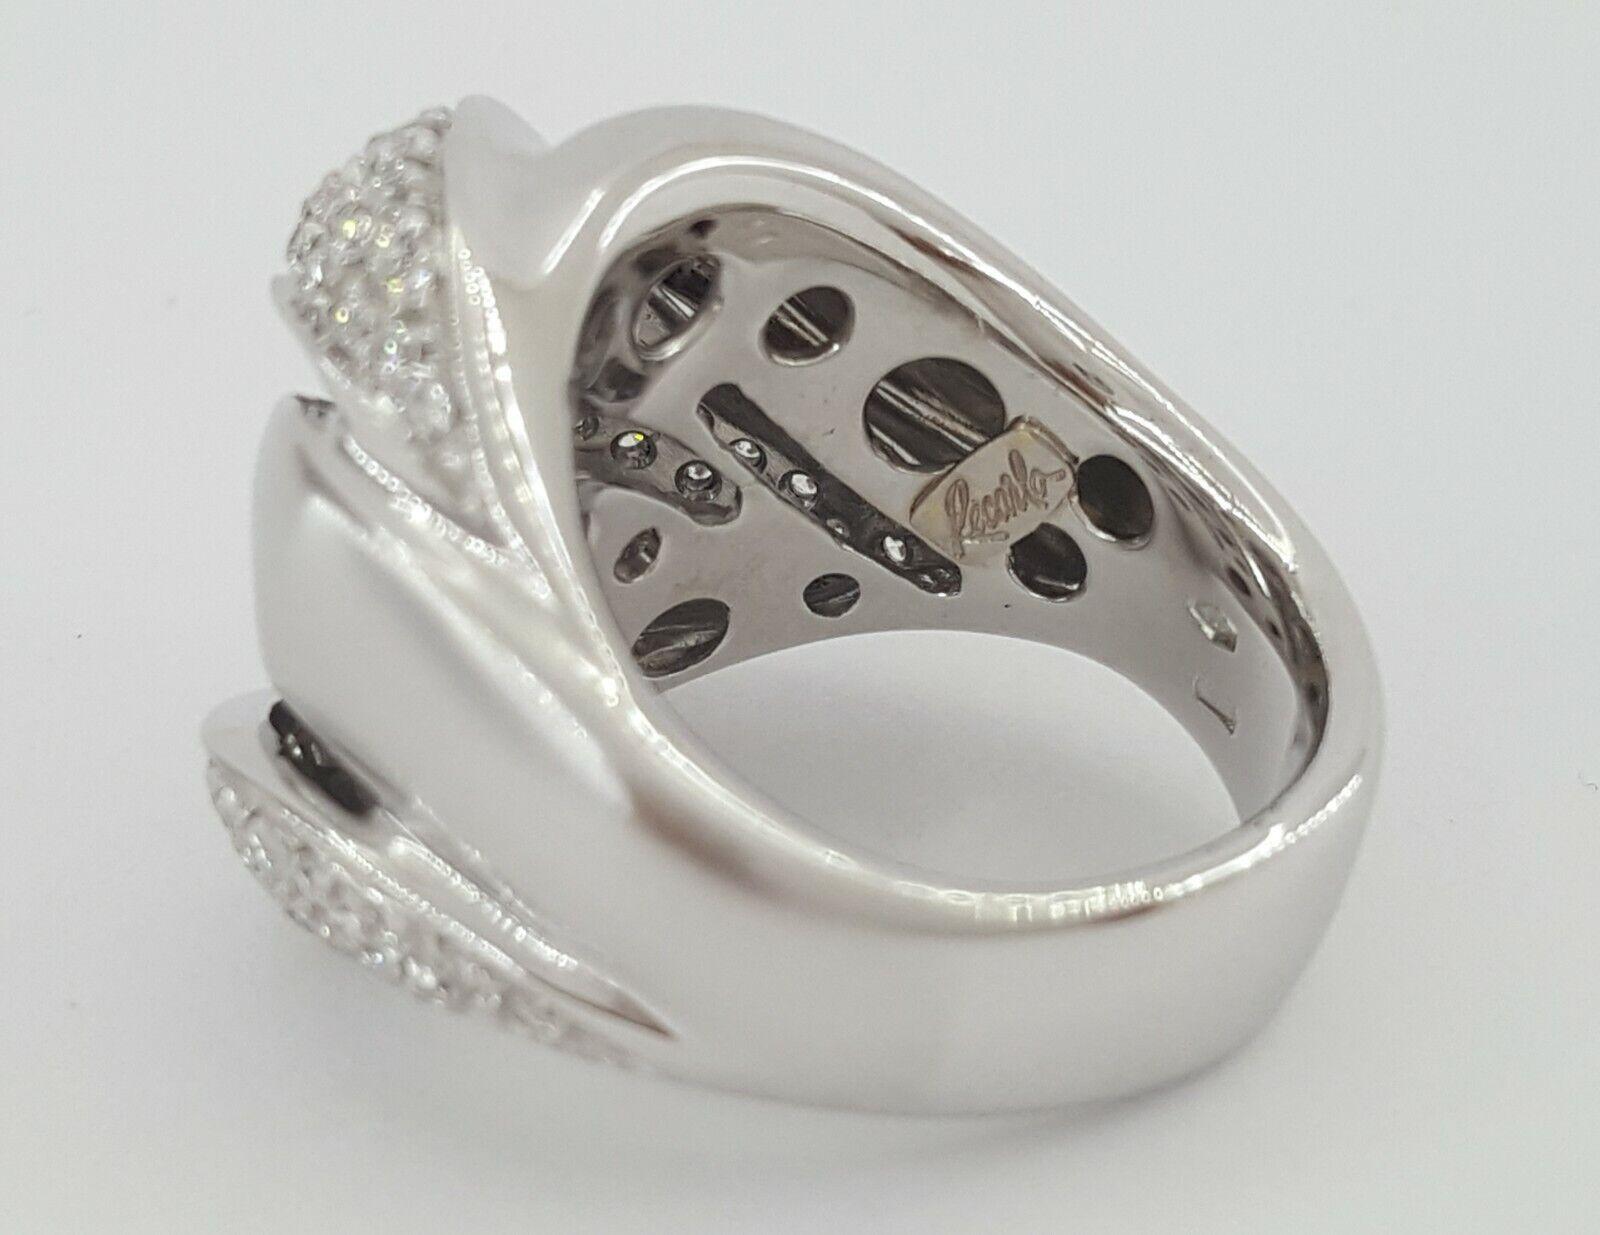 Recarlo 18 Carat White Gold Band Ring Round Brilliant Cut Diamond Ring In Excellent Condition For Sale In Rome, IT